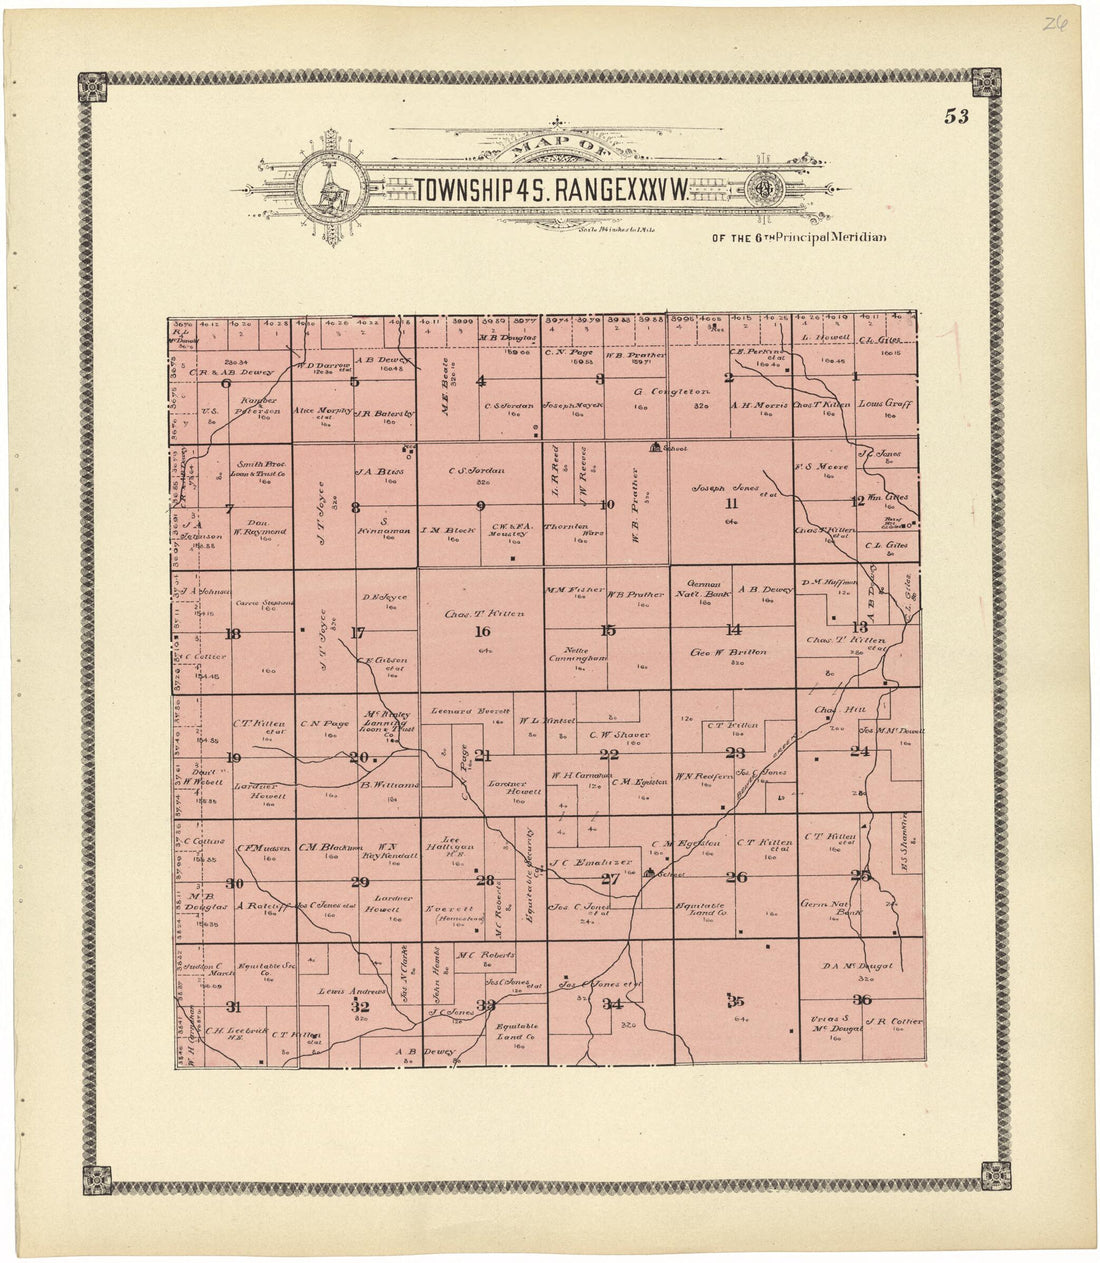 This old map of Map of Township 4 S. Range XXXV W. from Standard Atlas of Rawlins County, Kansas from 1906 was created by  Geo. A. Ogle &amp; Co in 1906